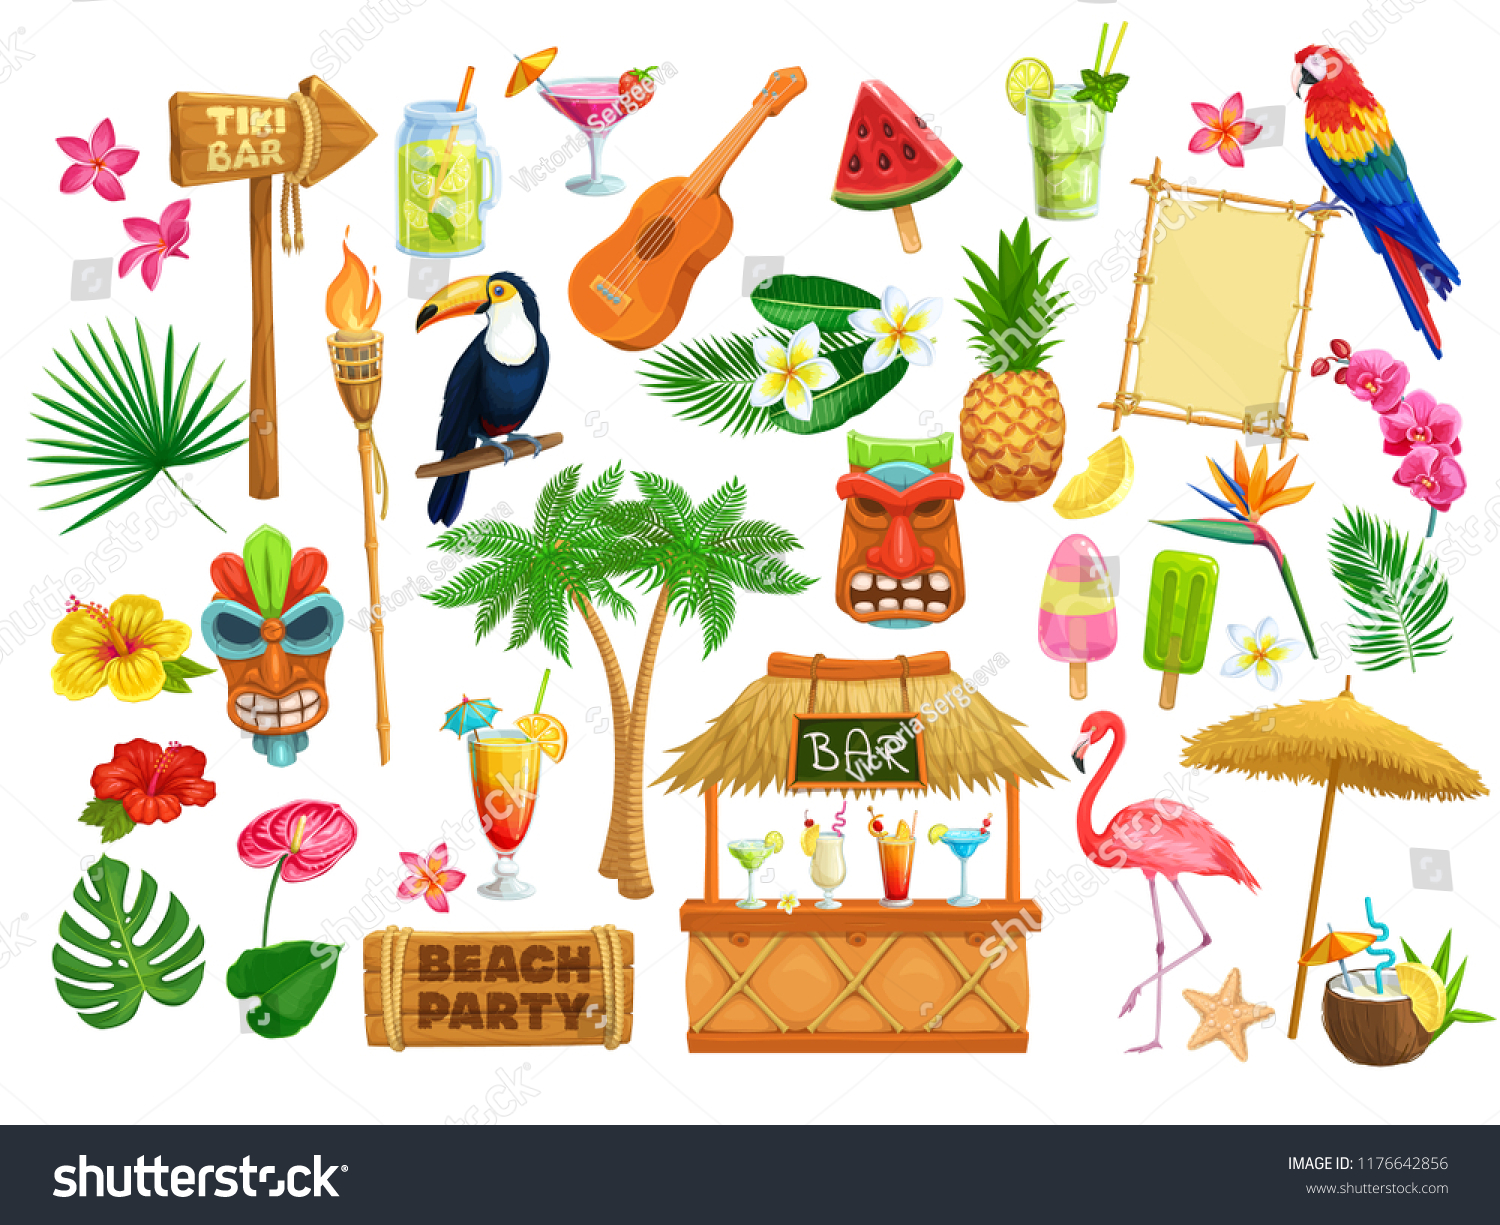 SVG of Vector hawaiian beach party icons. Tiki tribal mask, wooden signboard, tropical birds, cocktails, watermelon, torch, leaves and flowers. Guitar, fruit ice and pineapple for design luau holiday. svg